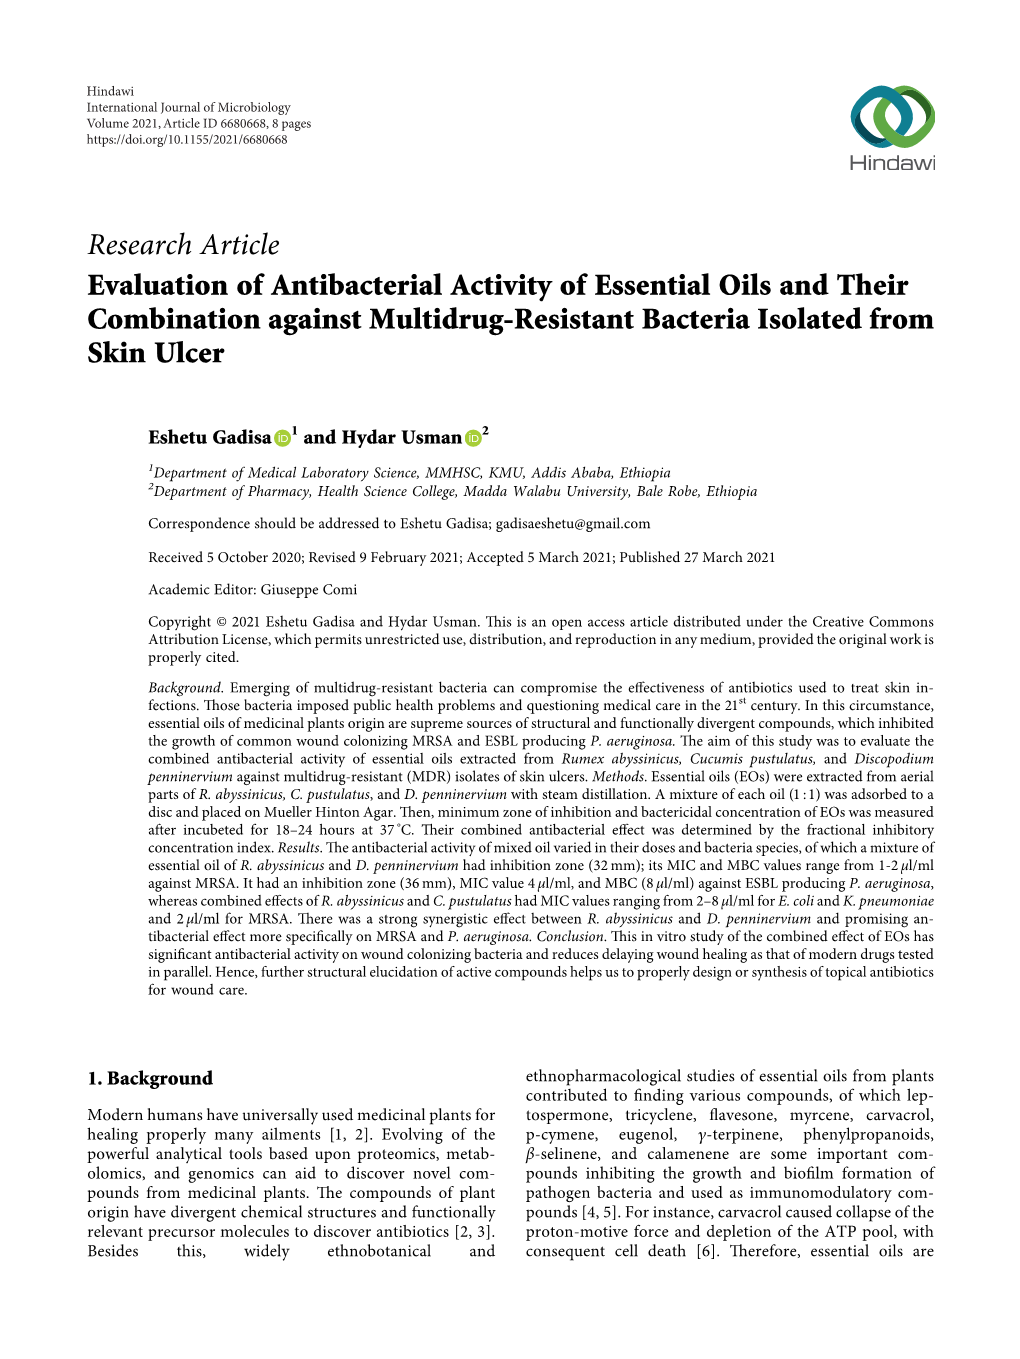 Evaluation of Antibacterial Activity of Essential Oils and Their Combination Against Multidrug-Resistant Bacteria Isolated from Skin Ulcer